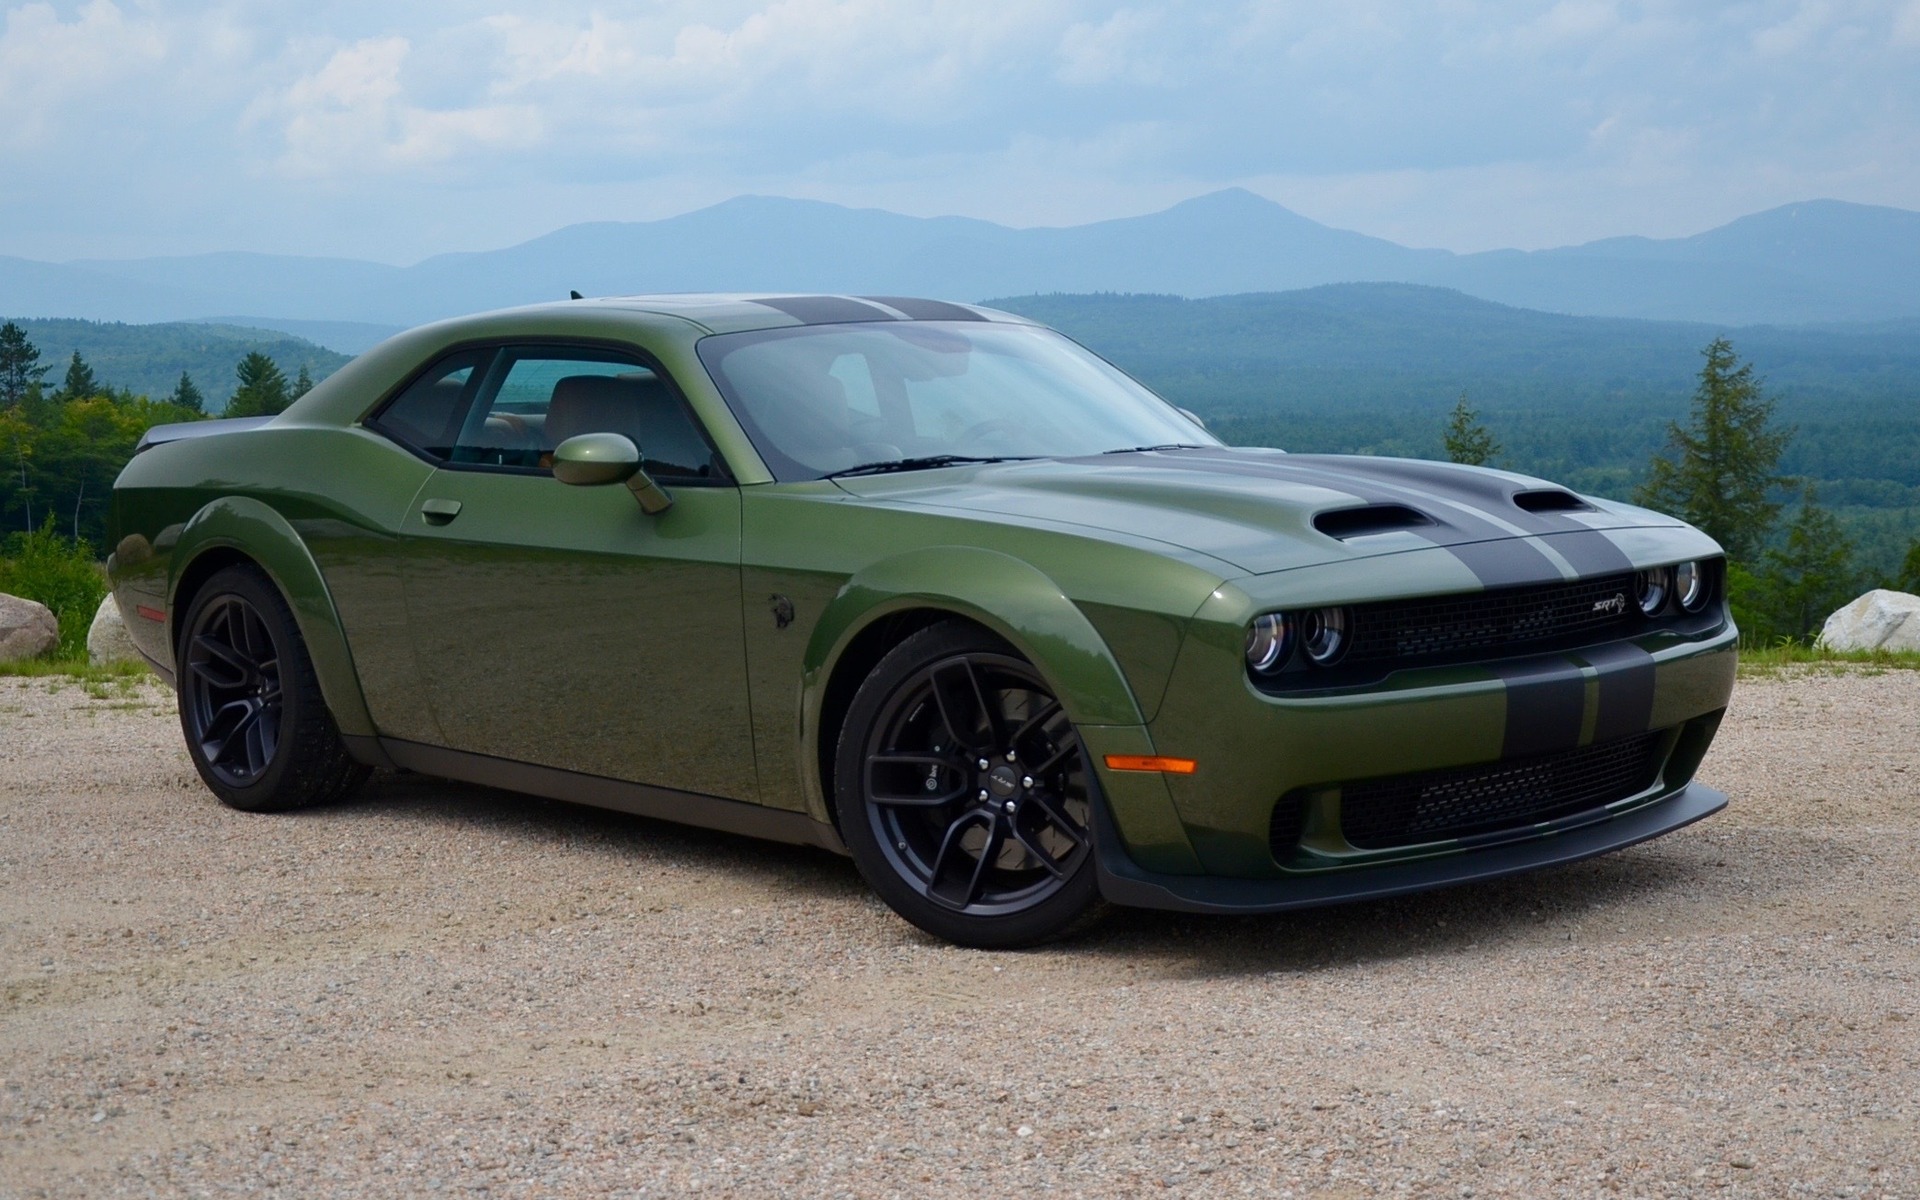 2019 Dodge Challenger photos 1 11 The Car Guide